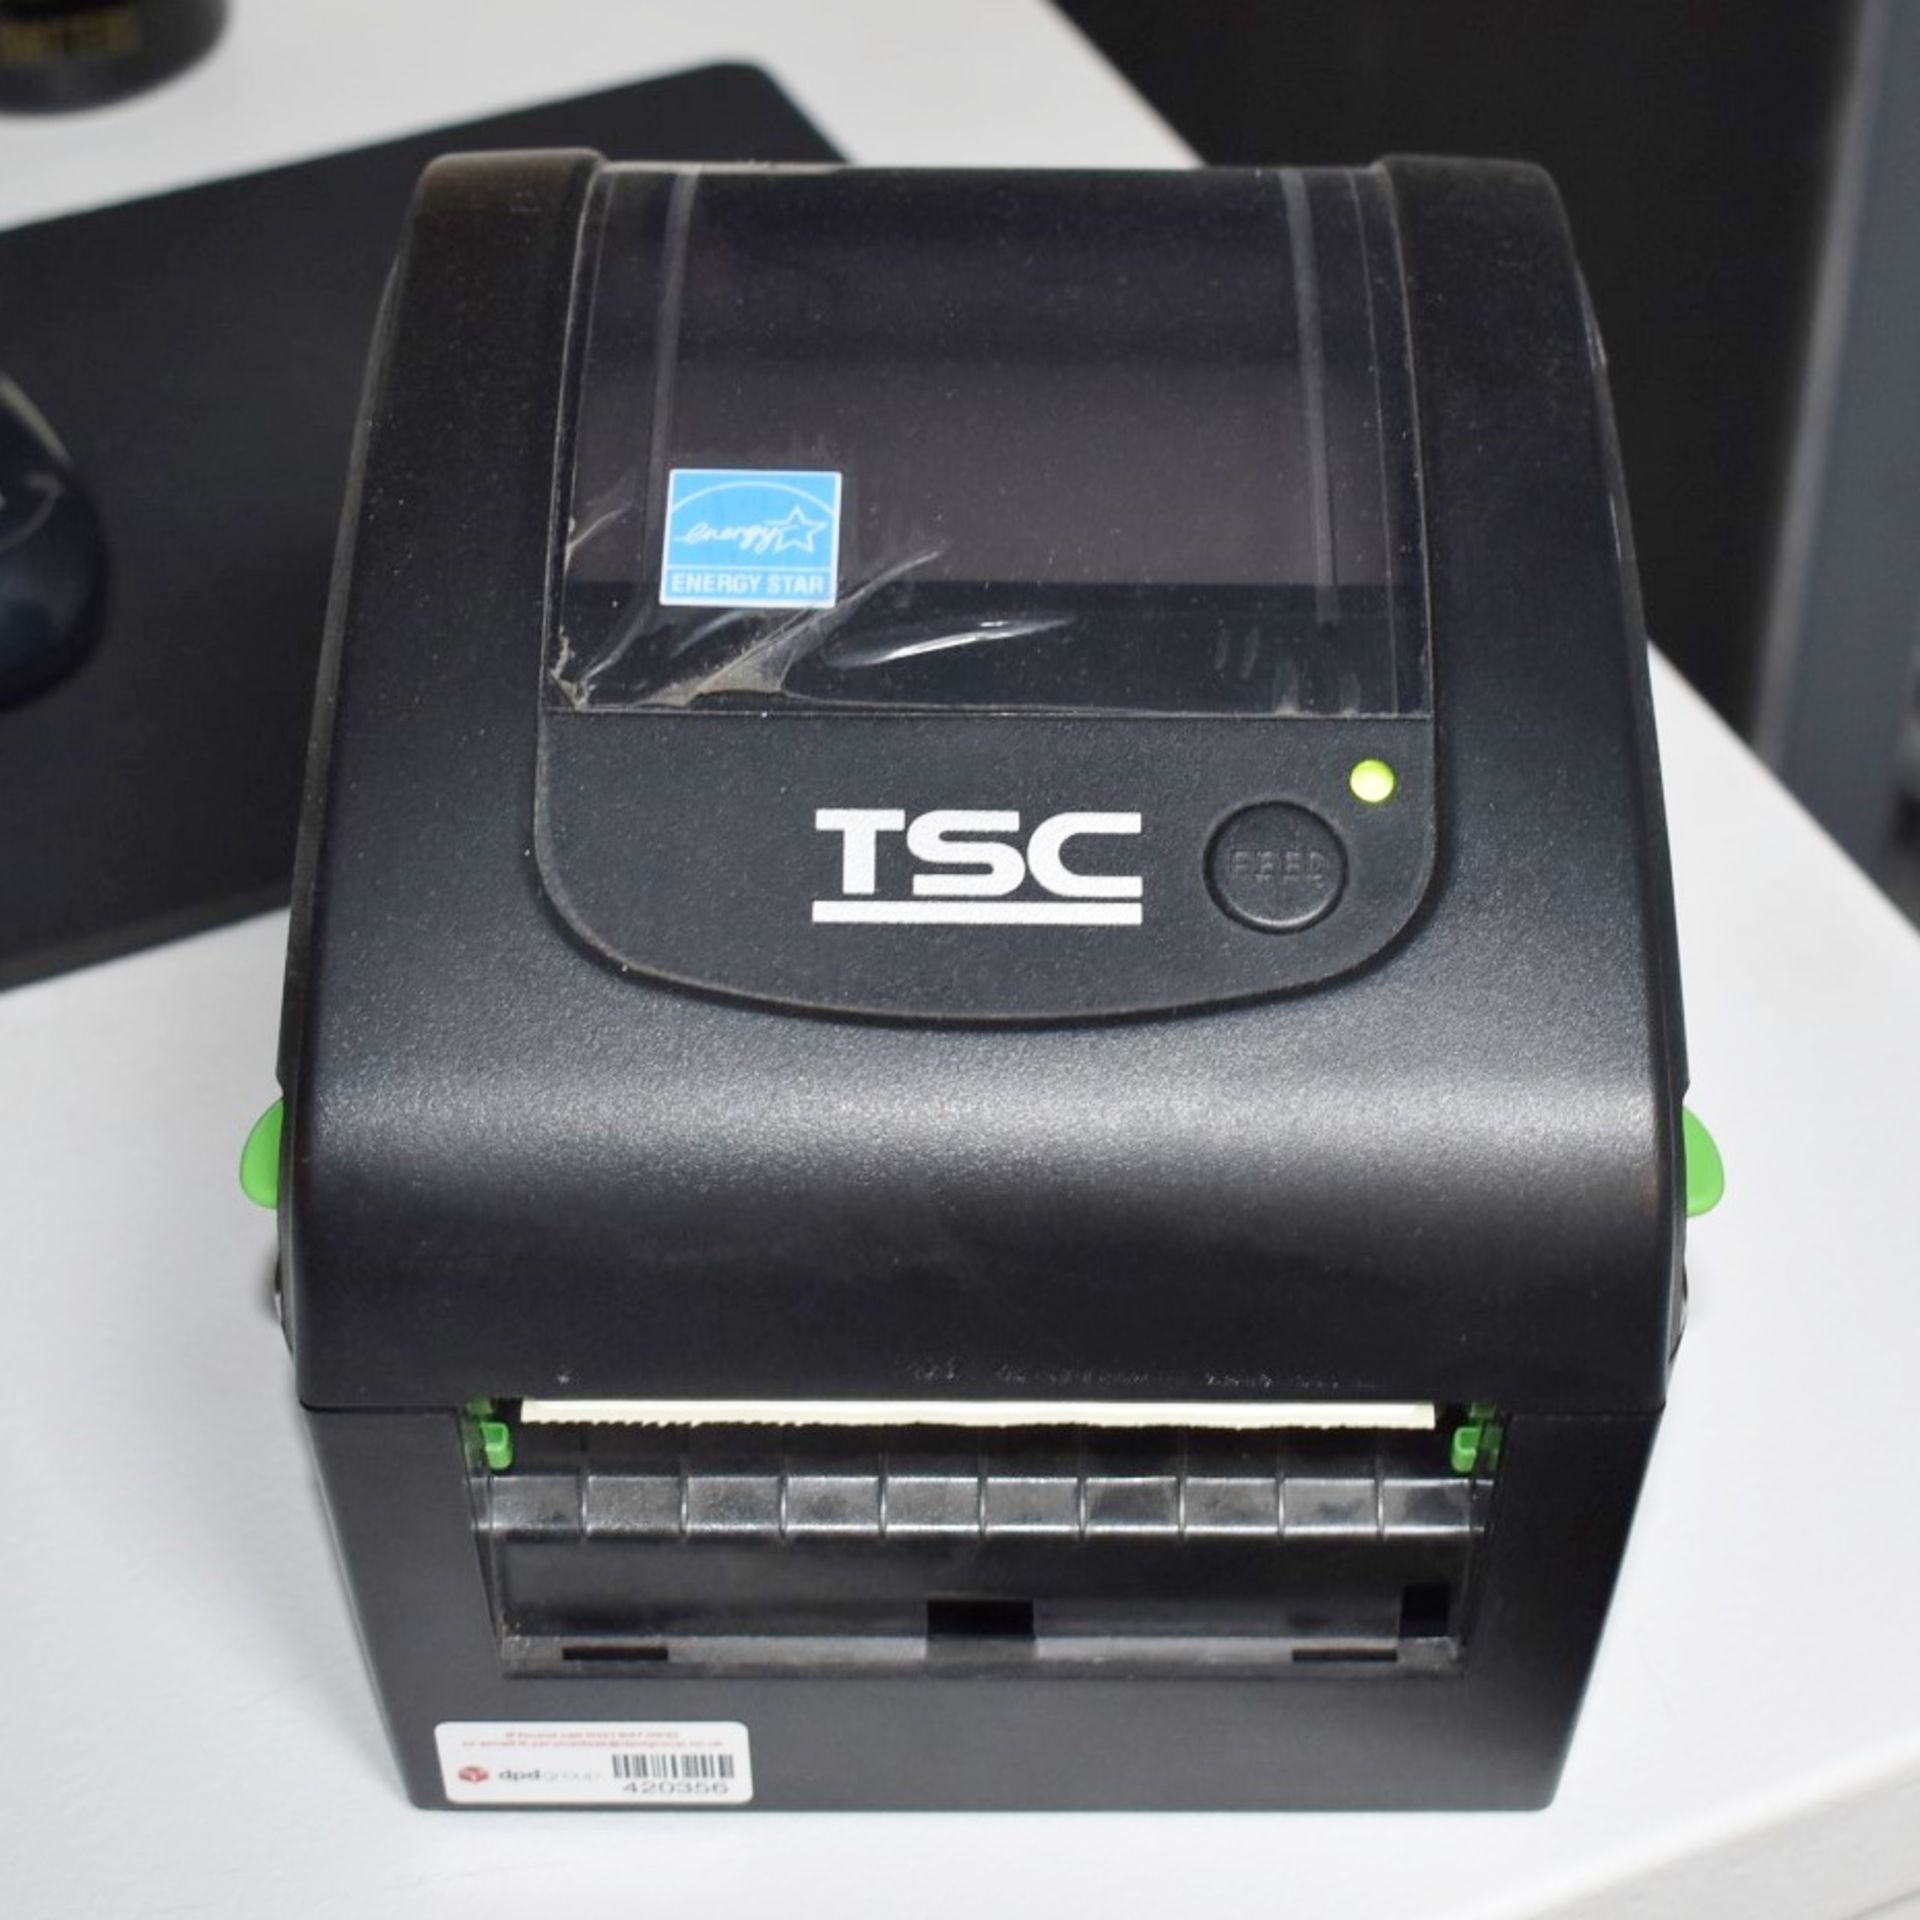 1 x TSC Direct Thermal USB Barcode Printer - Model DA210 - Includes Part Used Roll of Labels - Image 2 of 6